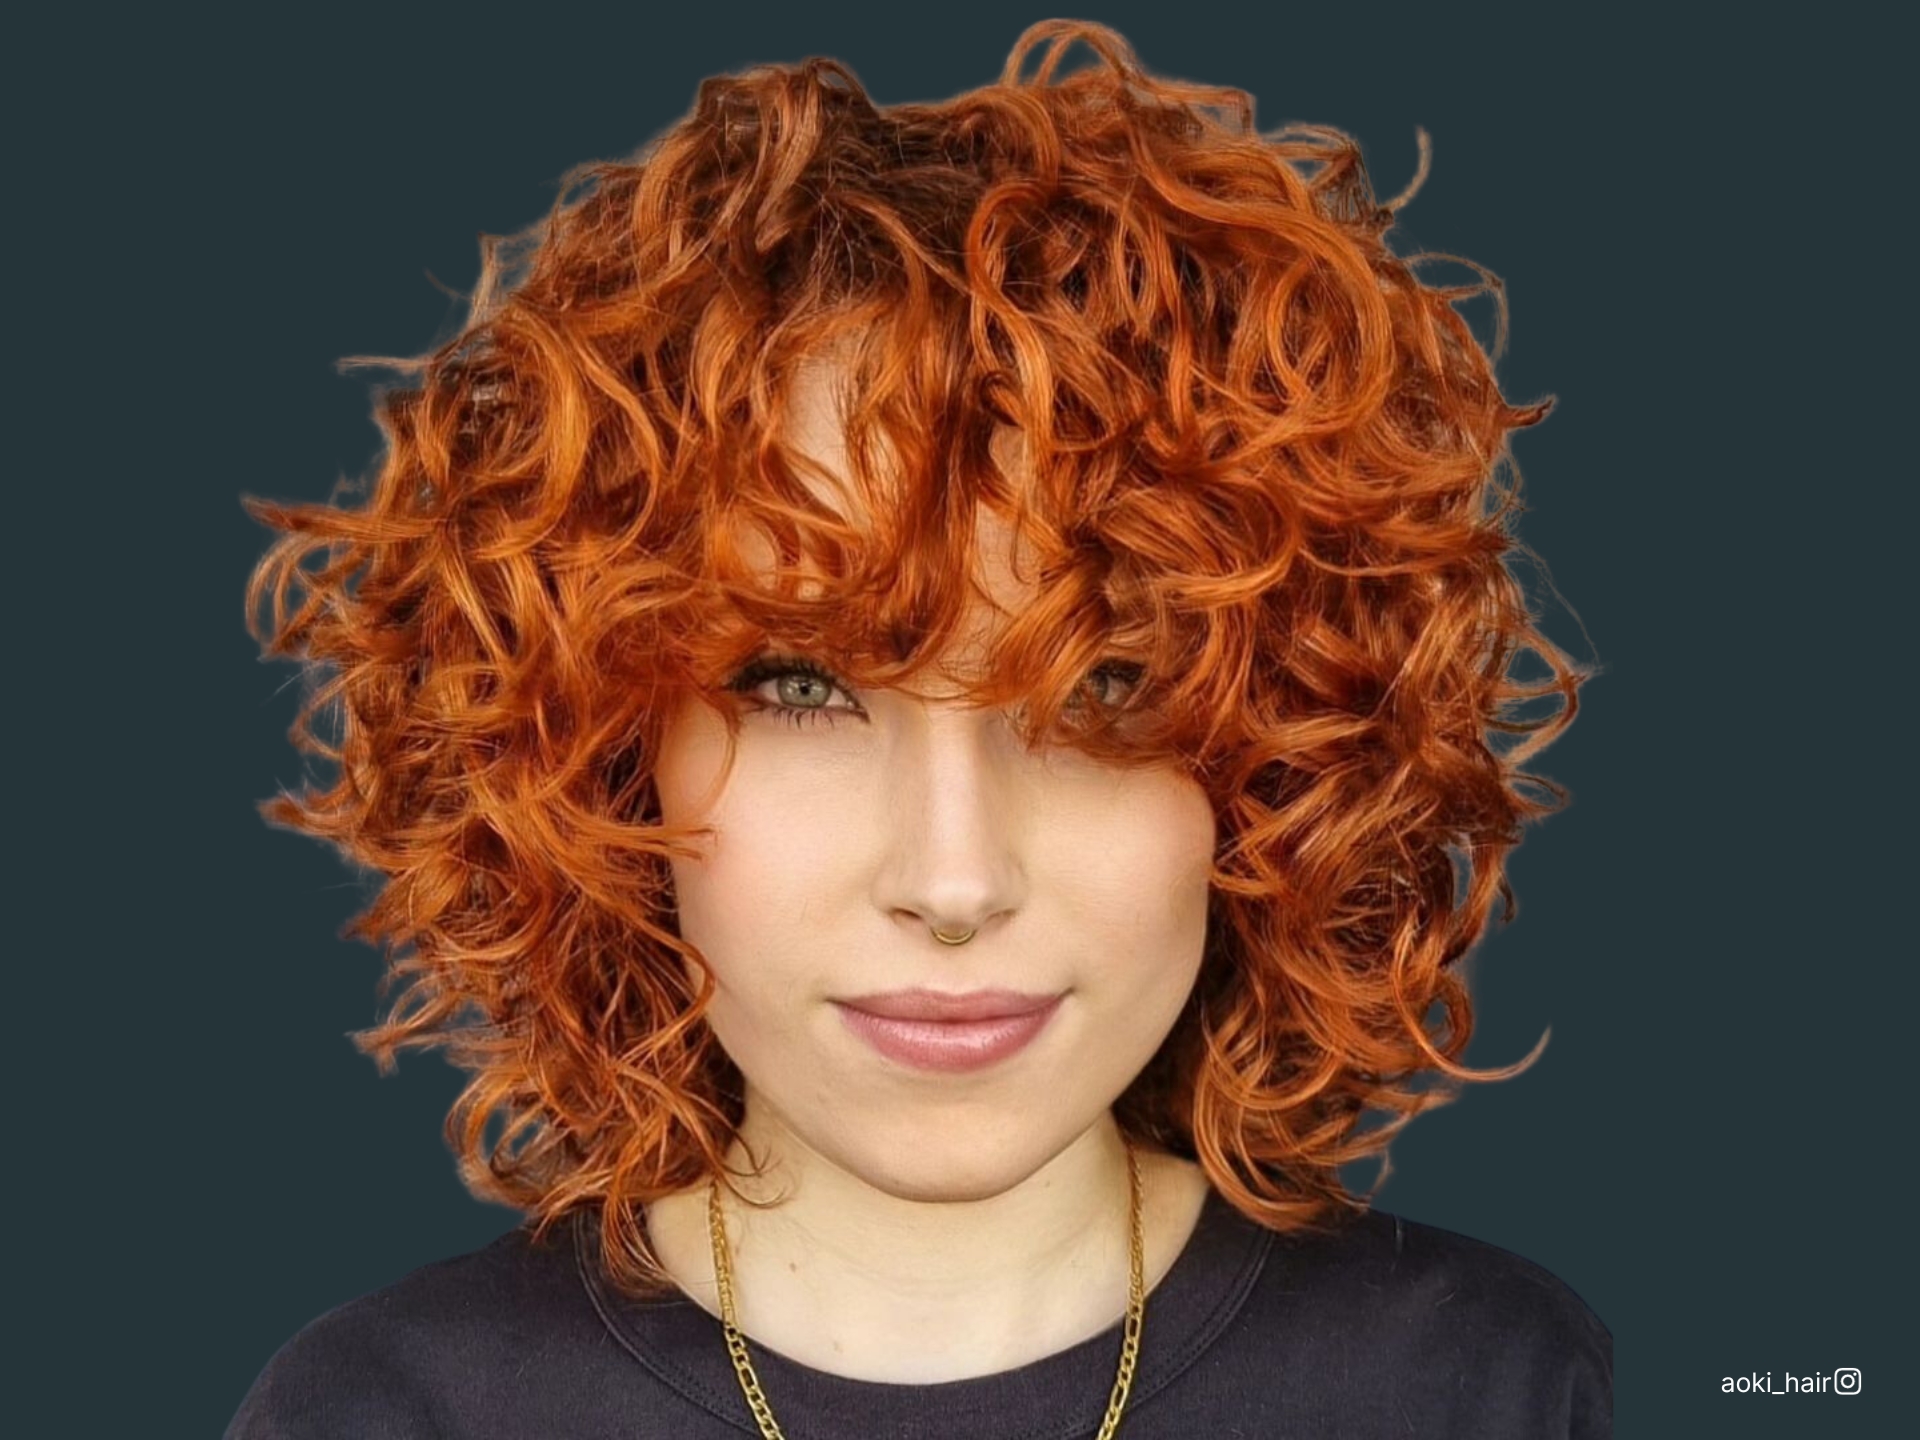 30 Creative Ideas To Spice Up Short Curly Hairstyles